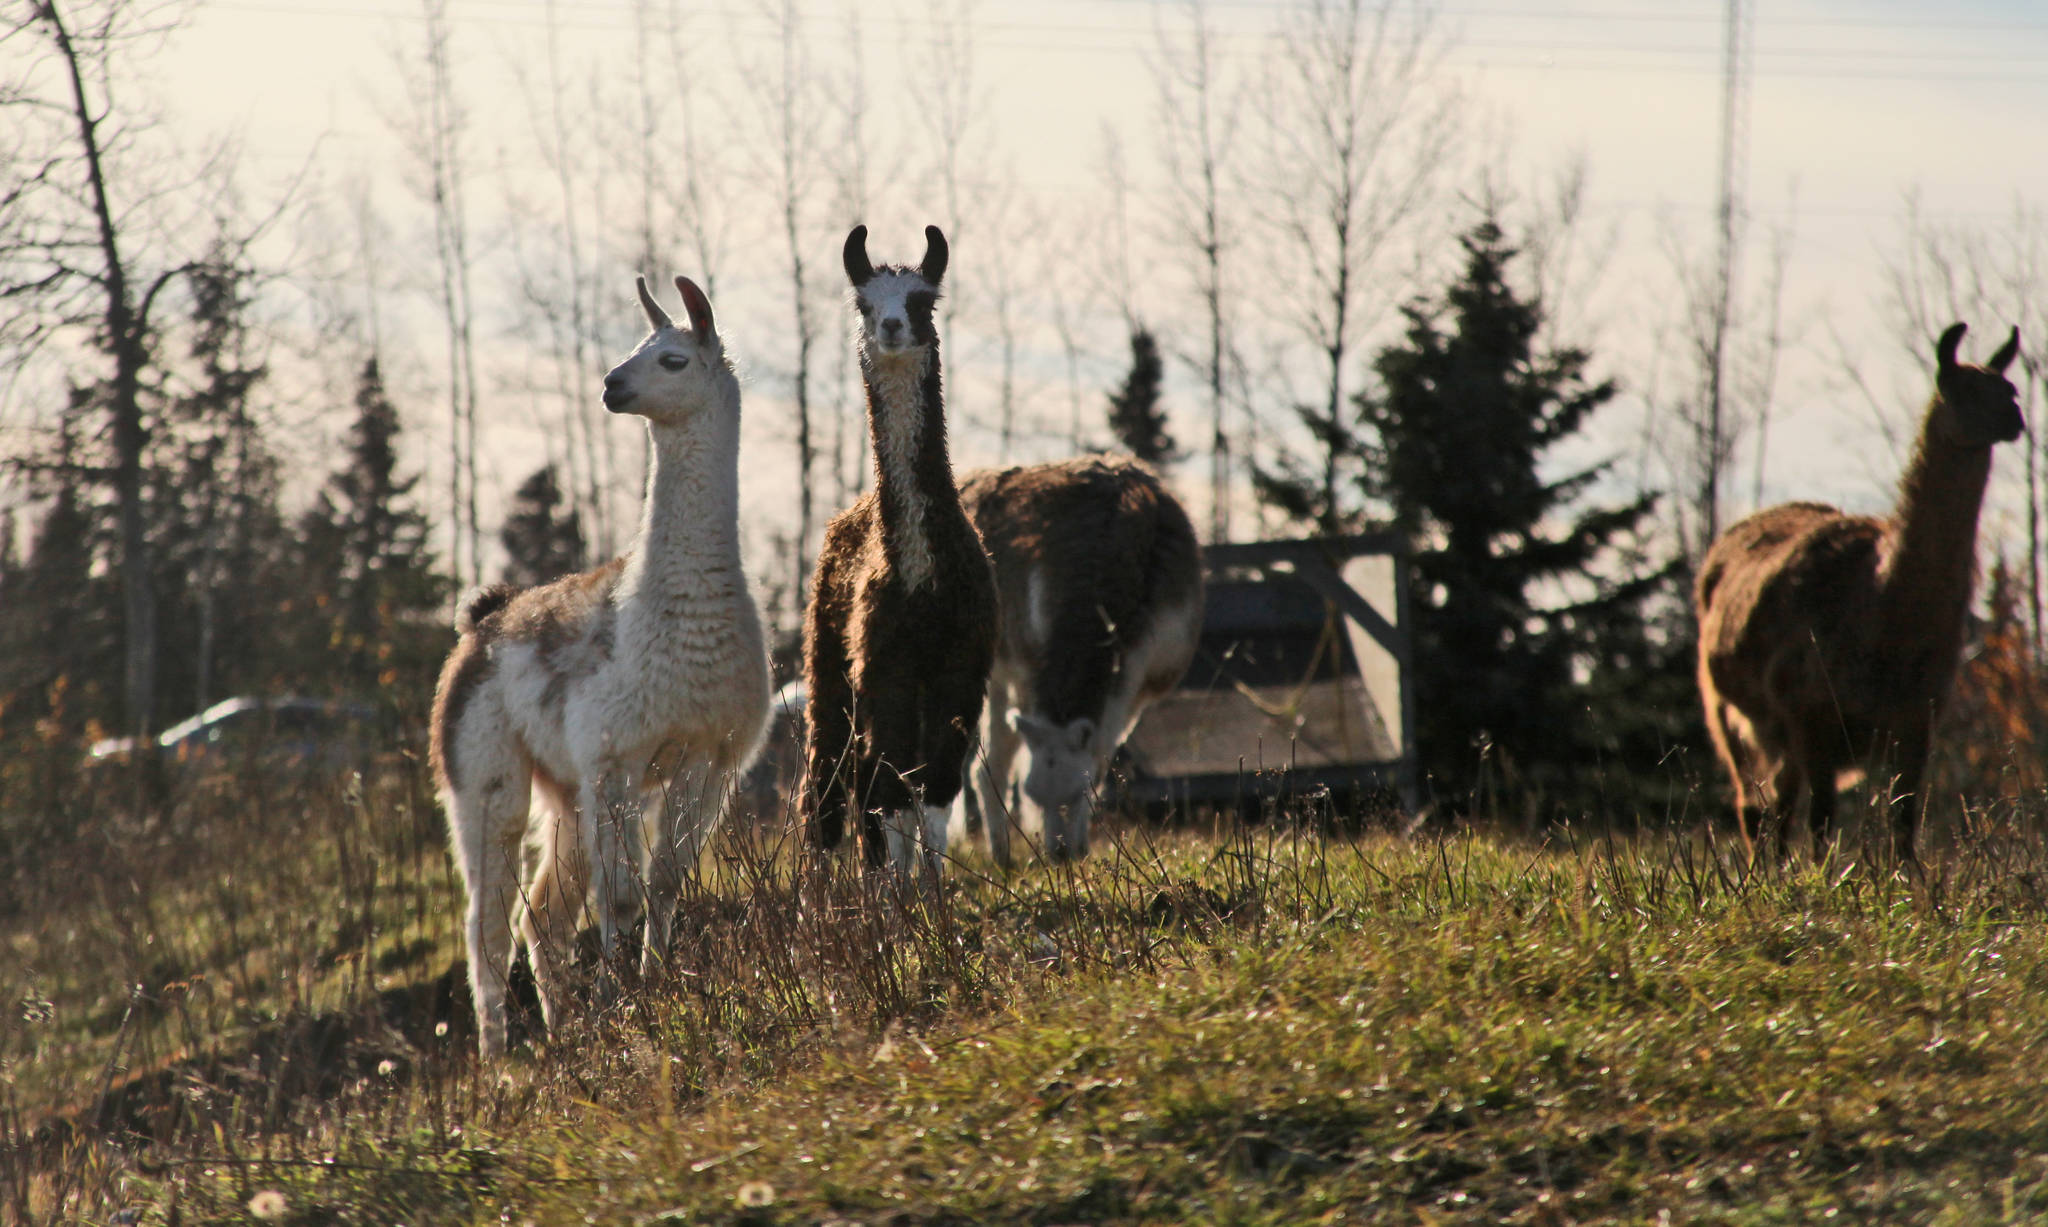 Llamas graze in the pasture of Diamond M Ranch Resort on Tuesday near Kenai. Three calves were born this summer to the herd that Diamond M owners Ronna and Blair Martin have kept since the 1990s. Though members of the Martin family have made yarn and felt hats from llama wool, taken them as pack animals on camping trips, and occassionally harvested one for meat, the llamas are mostly “exotic lawn ornaments,” Ronna Martin said.